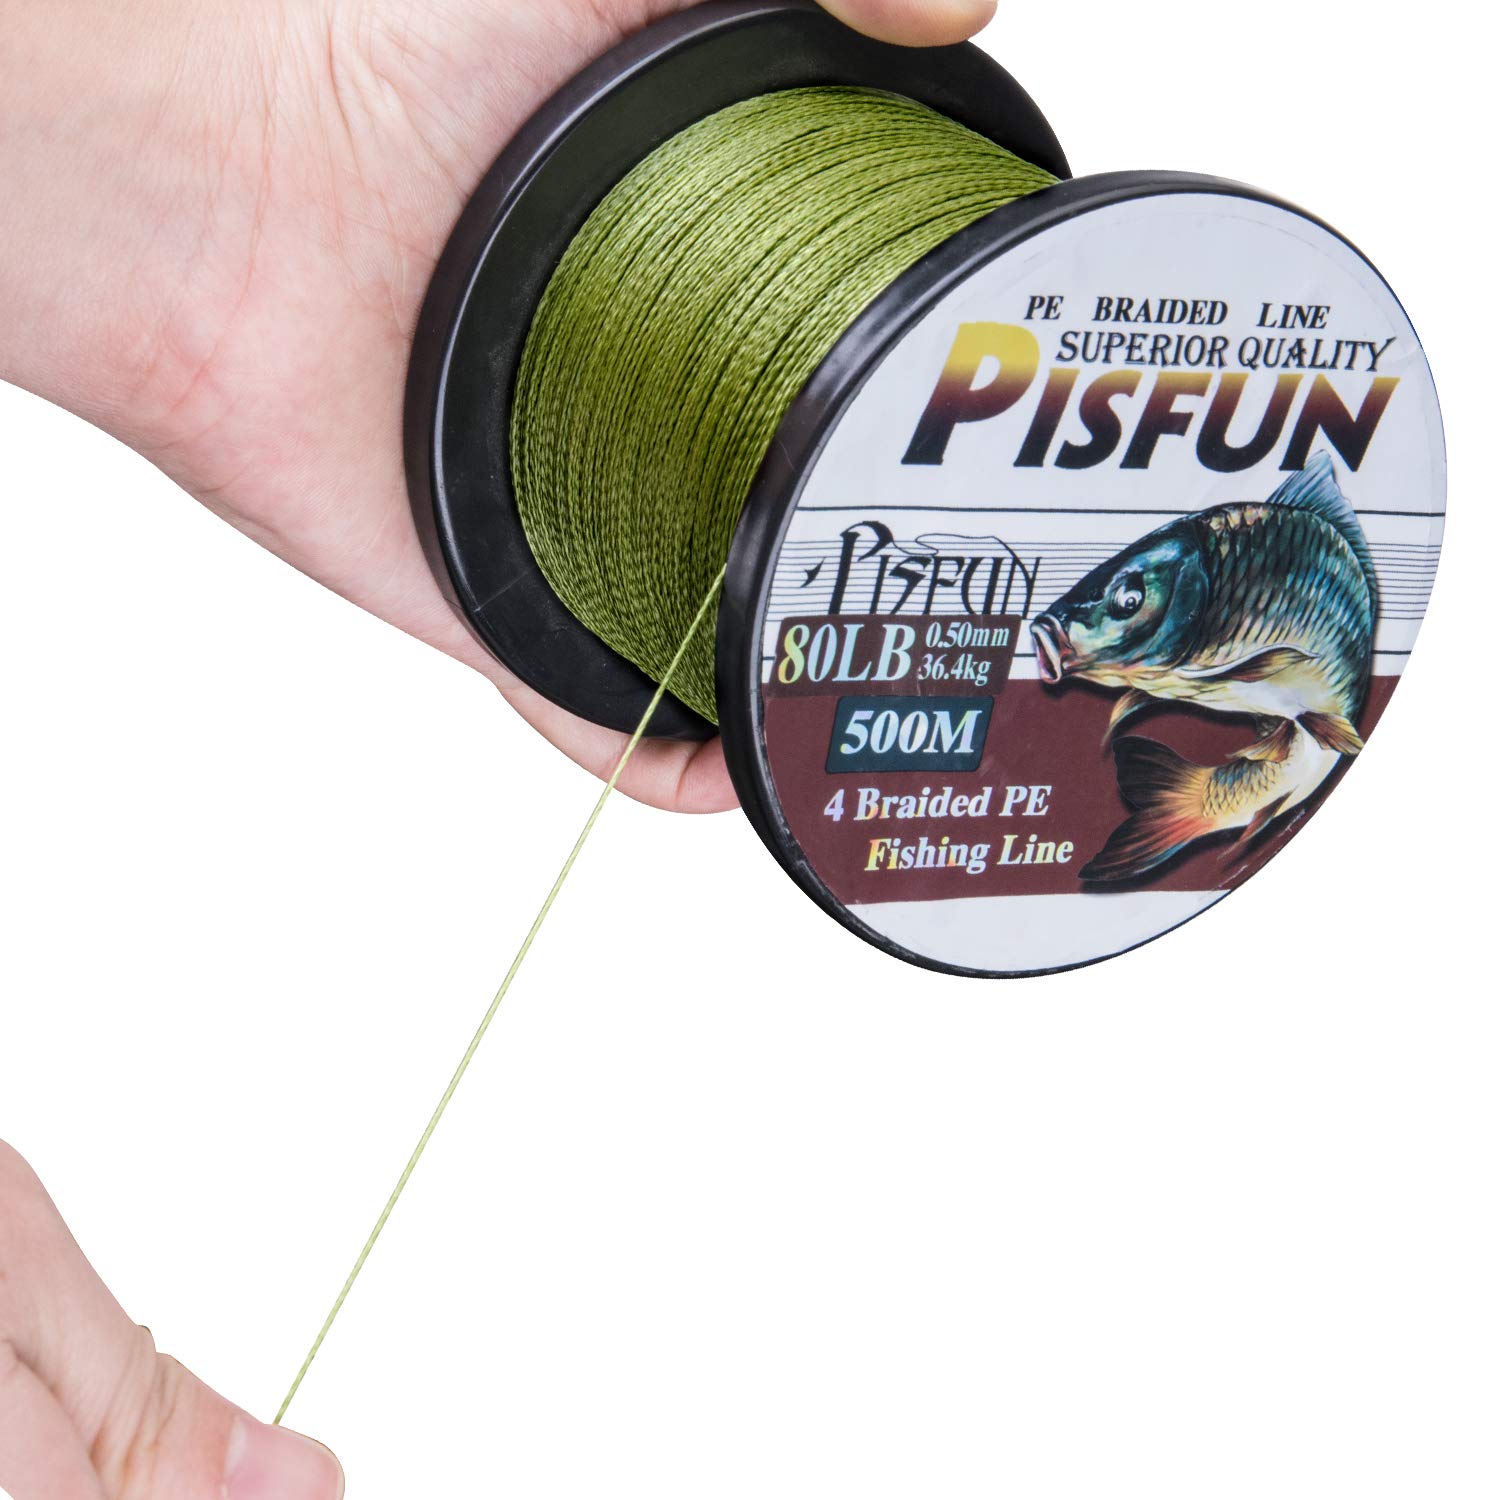 * Pisfun 4X Braided Fishing Line - Strong and Durable 500m Multifilament  Line for Superior Casting and Hooking